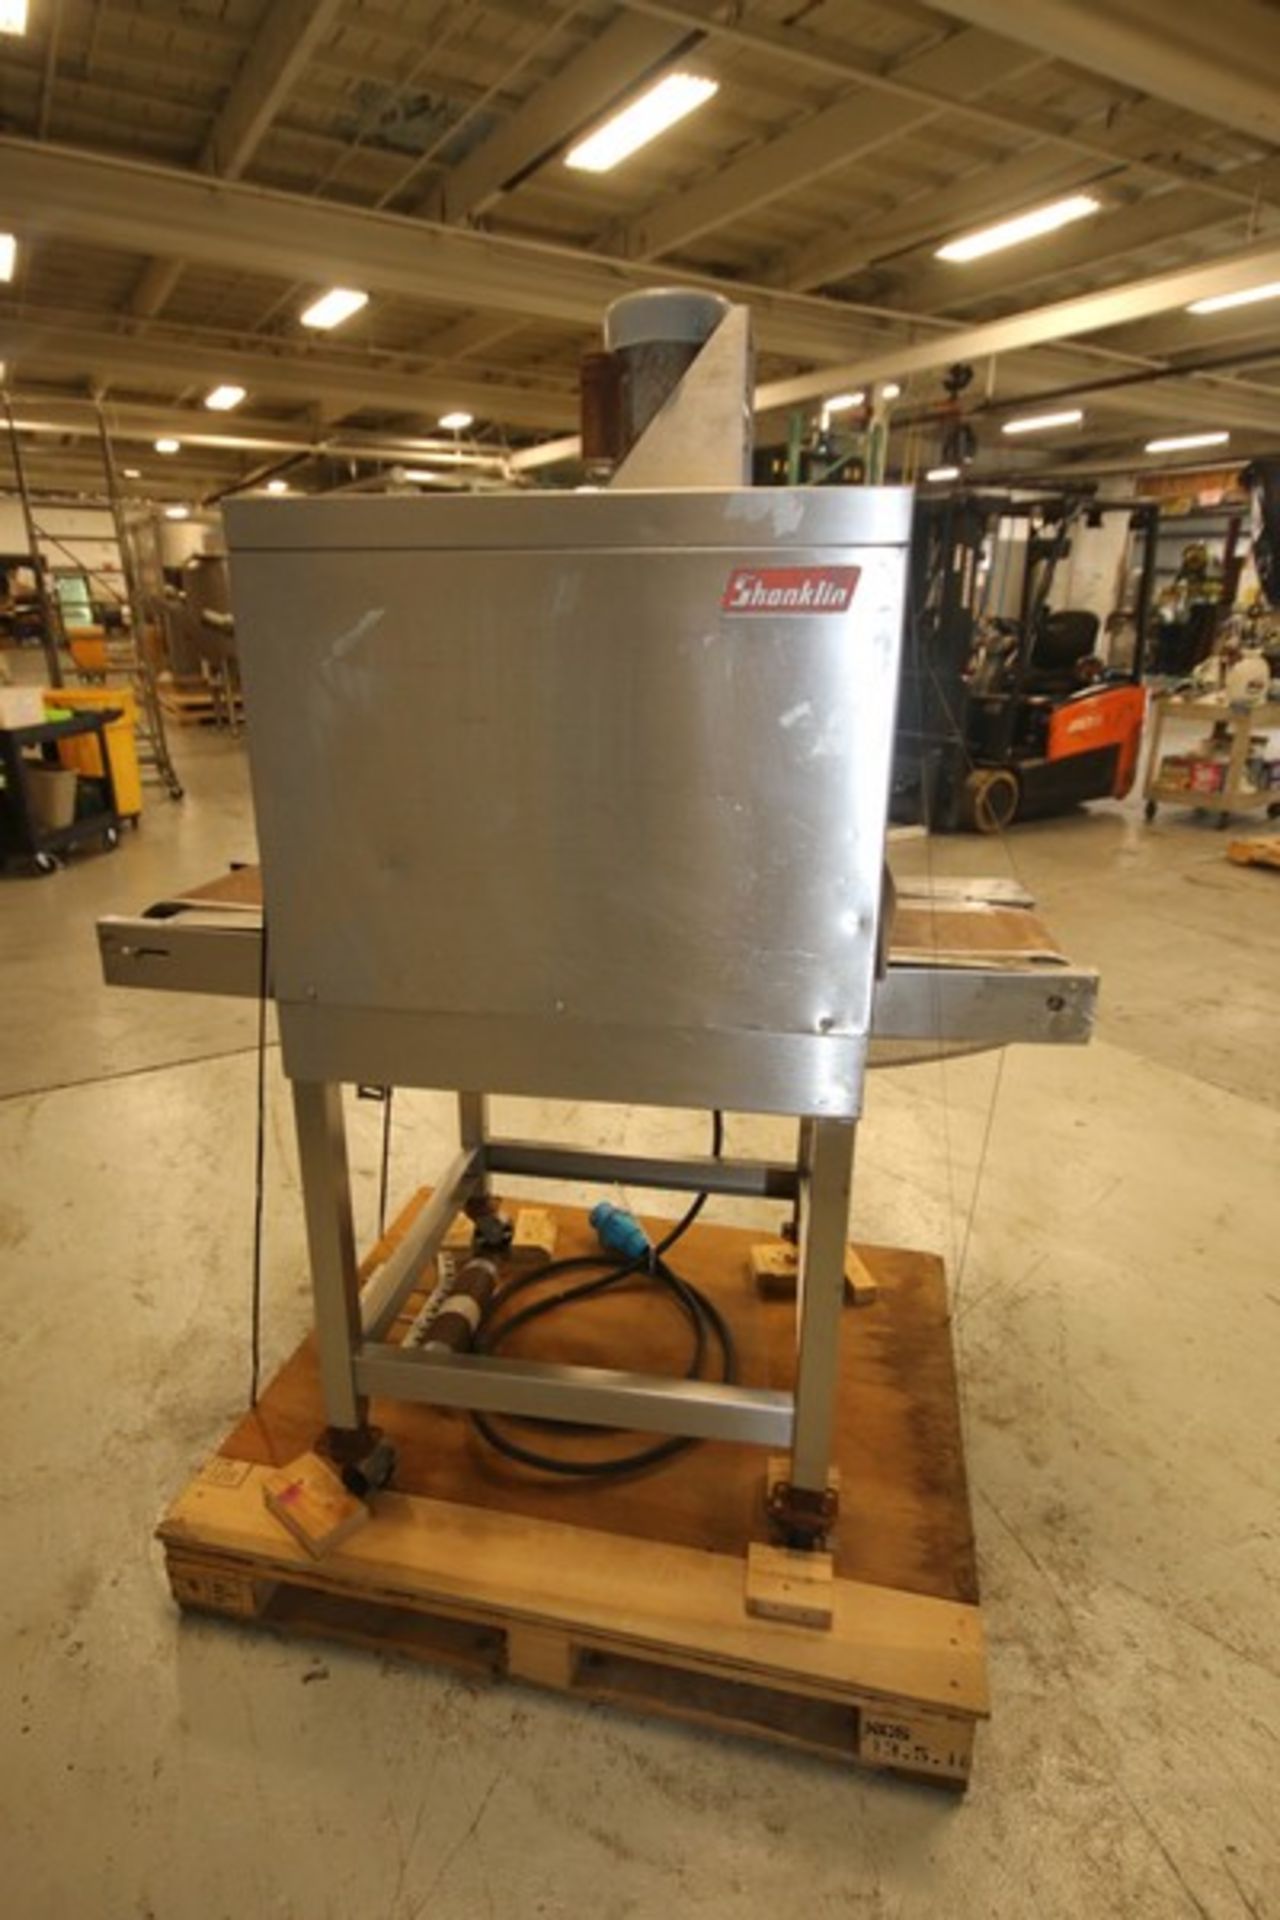 Shanklin 11" W x 6.5" H S/S Shrink Wrap Heat Tunnel, 115 V, Mounted on Casters (INV#88602)(Located @ - Bild 3 aus 8